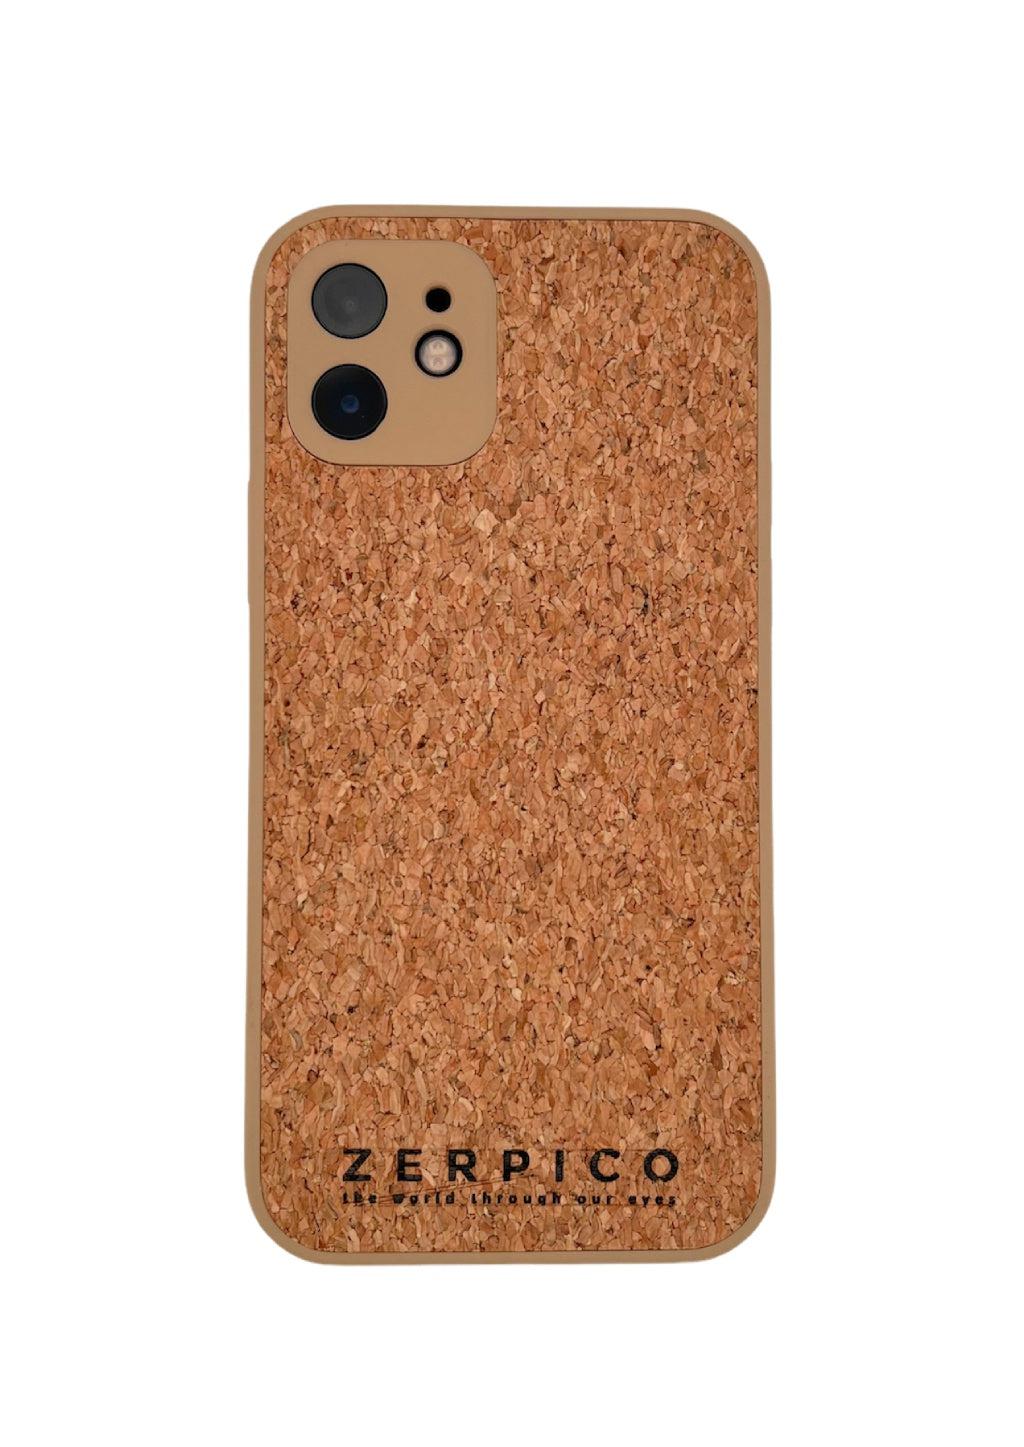 Mobile phone case made of cork.